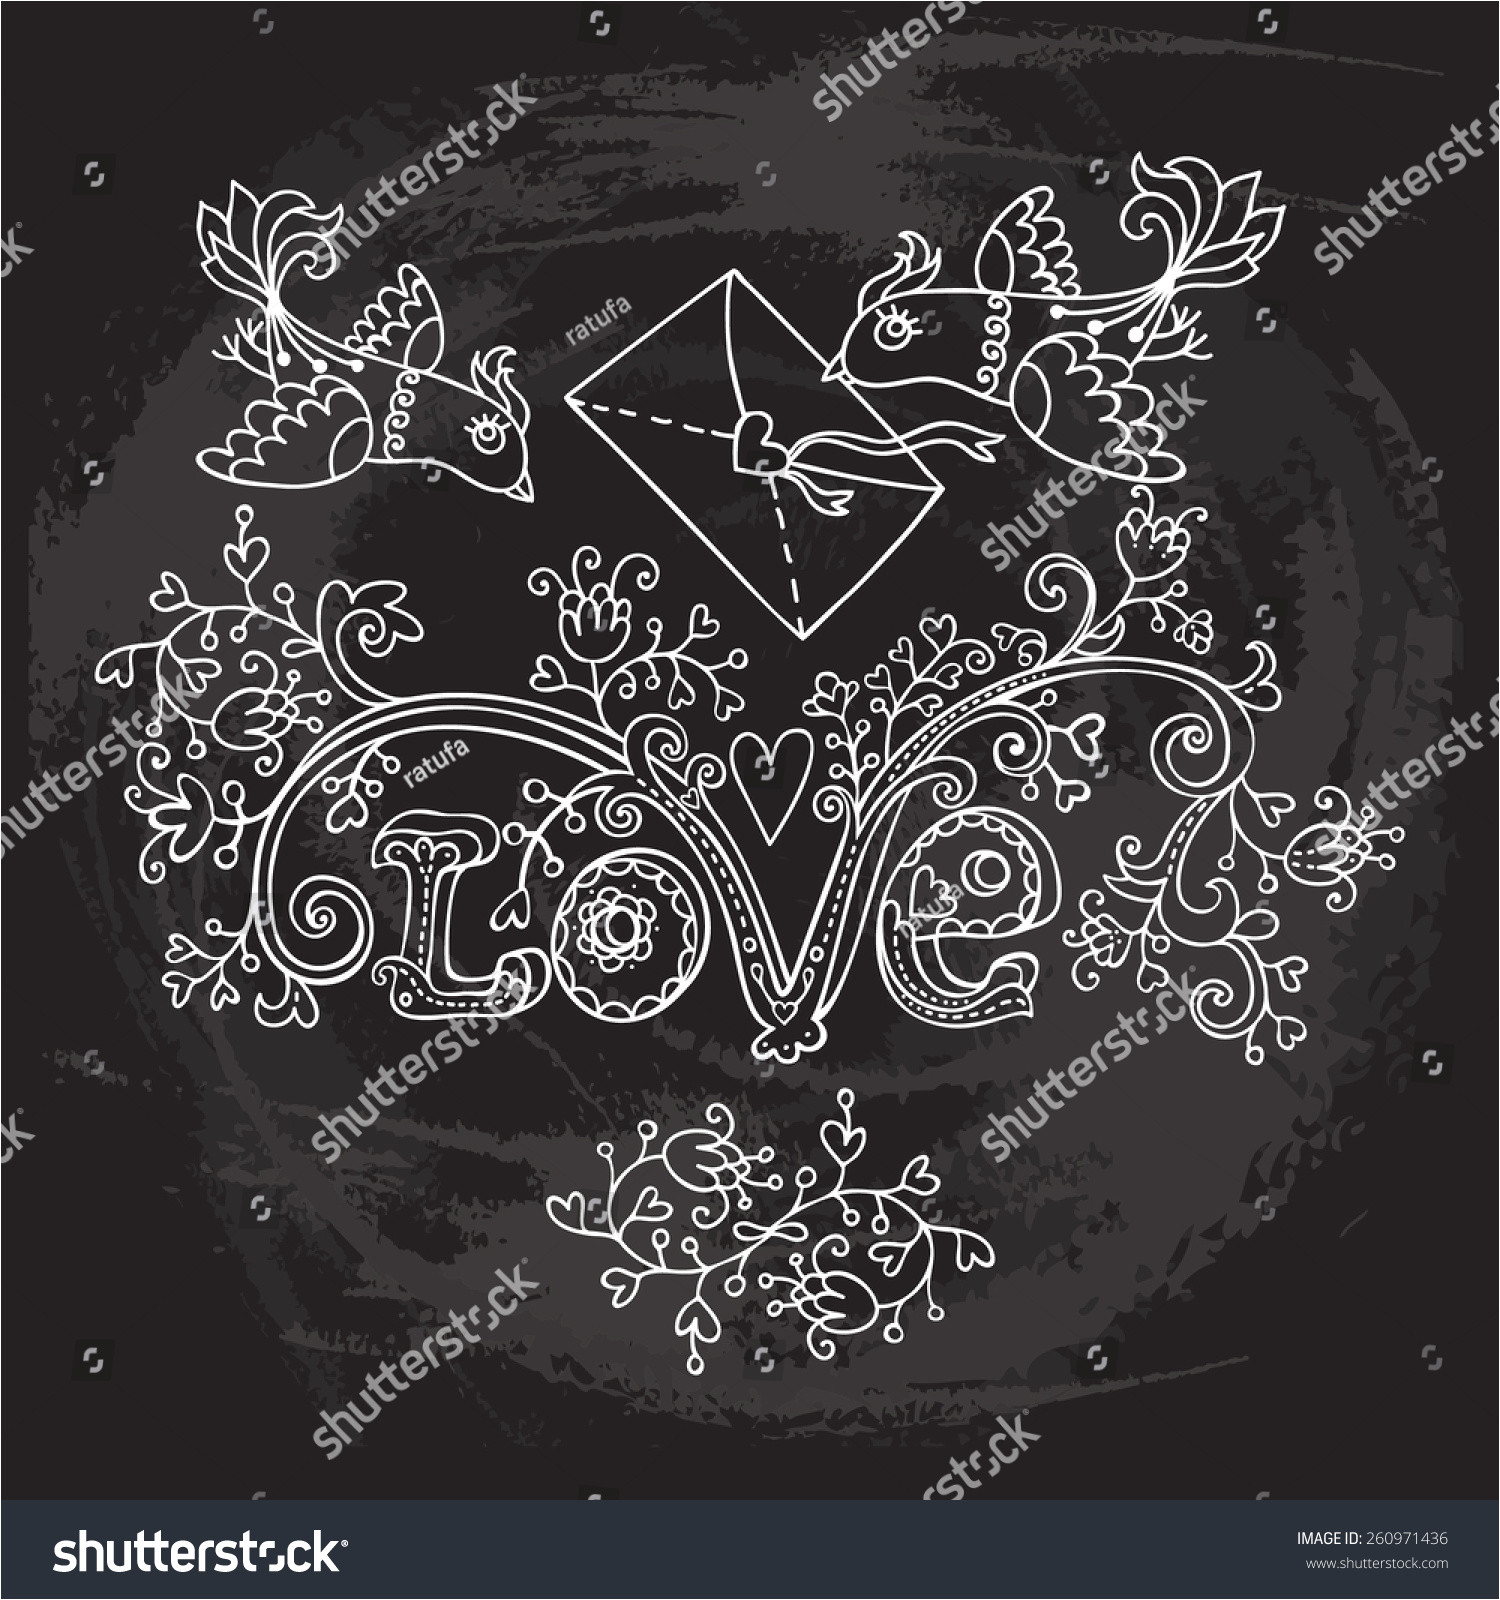 stock vector romantic vector card with love birds and floral love lettering stylized chalkboard drawing can be 260971436 jpg